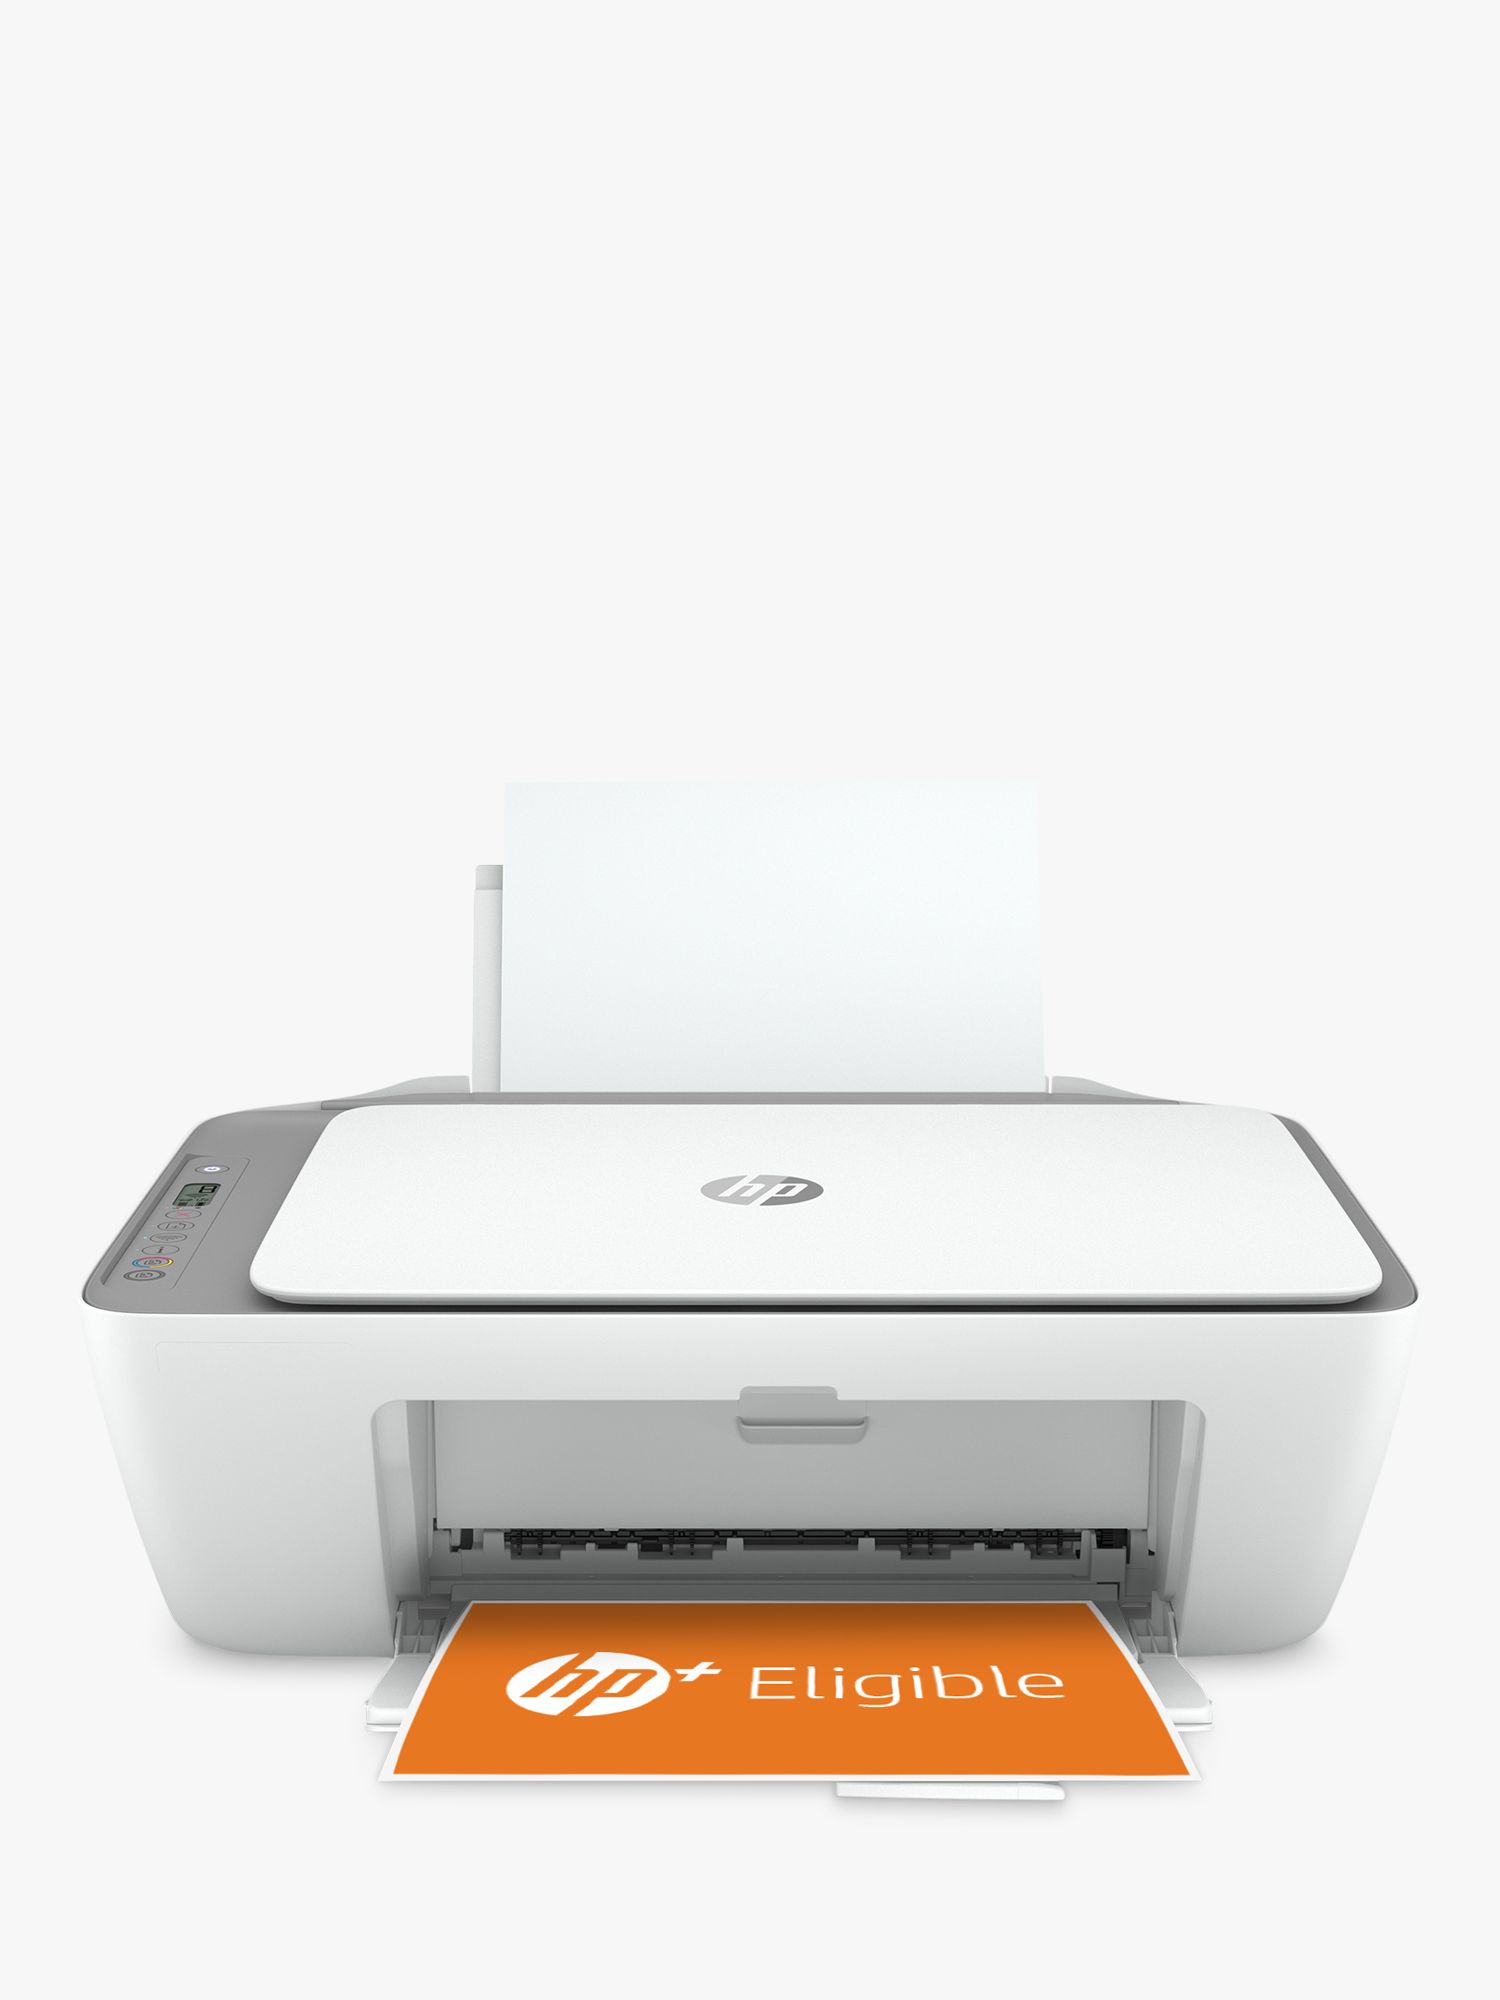 HP Deskjet 2720e All-in-One Wireless Printer, Enabled & HP Instant Ink Compatible, White & Grey